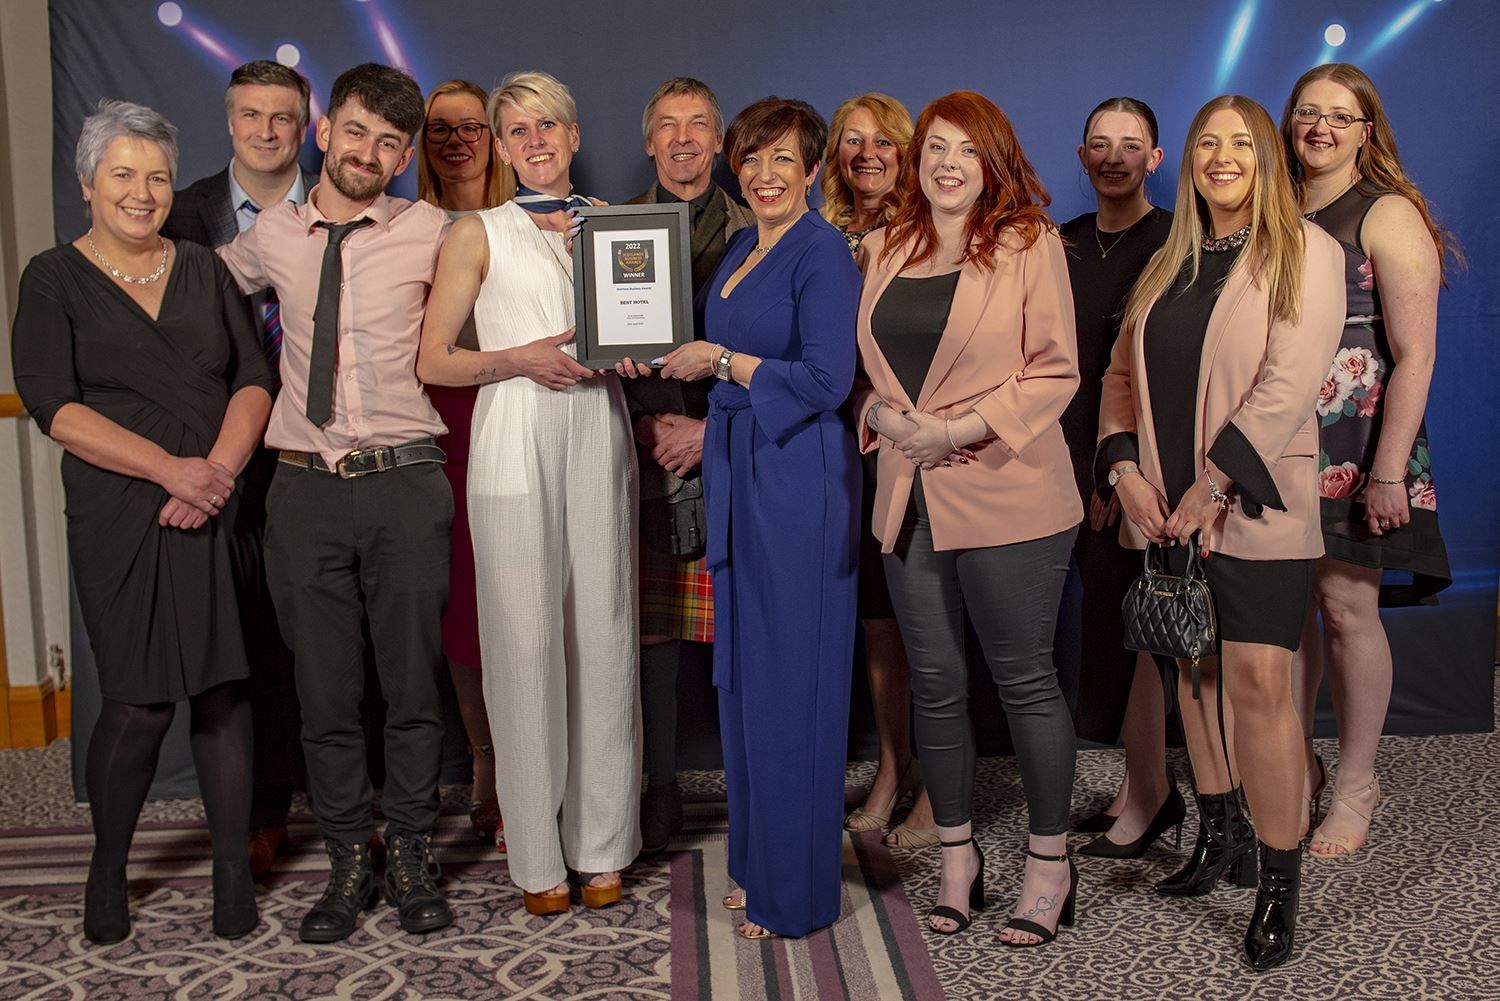 The Station Hotel won 'best hotel' for the region in April.